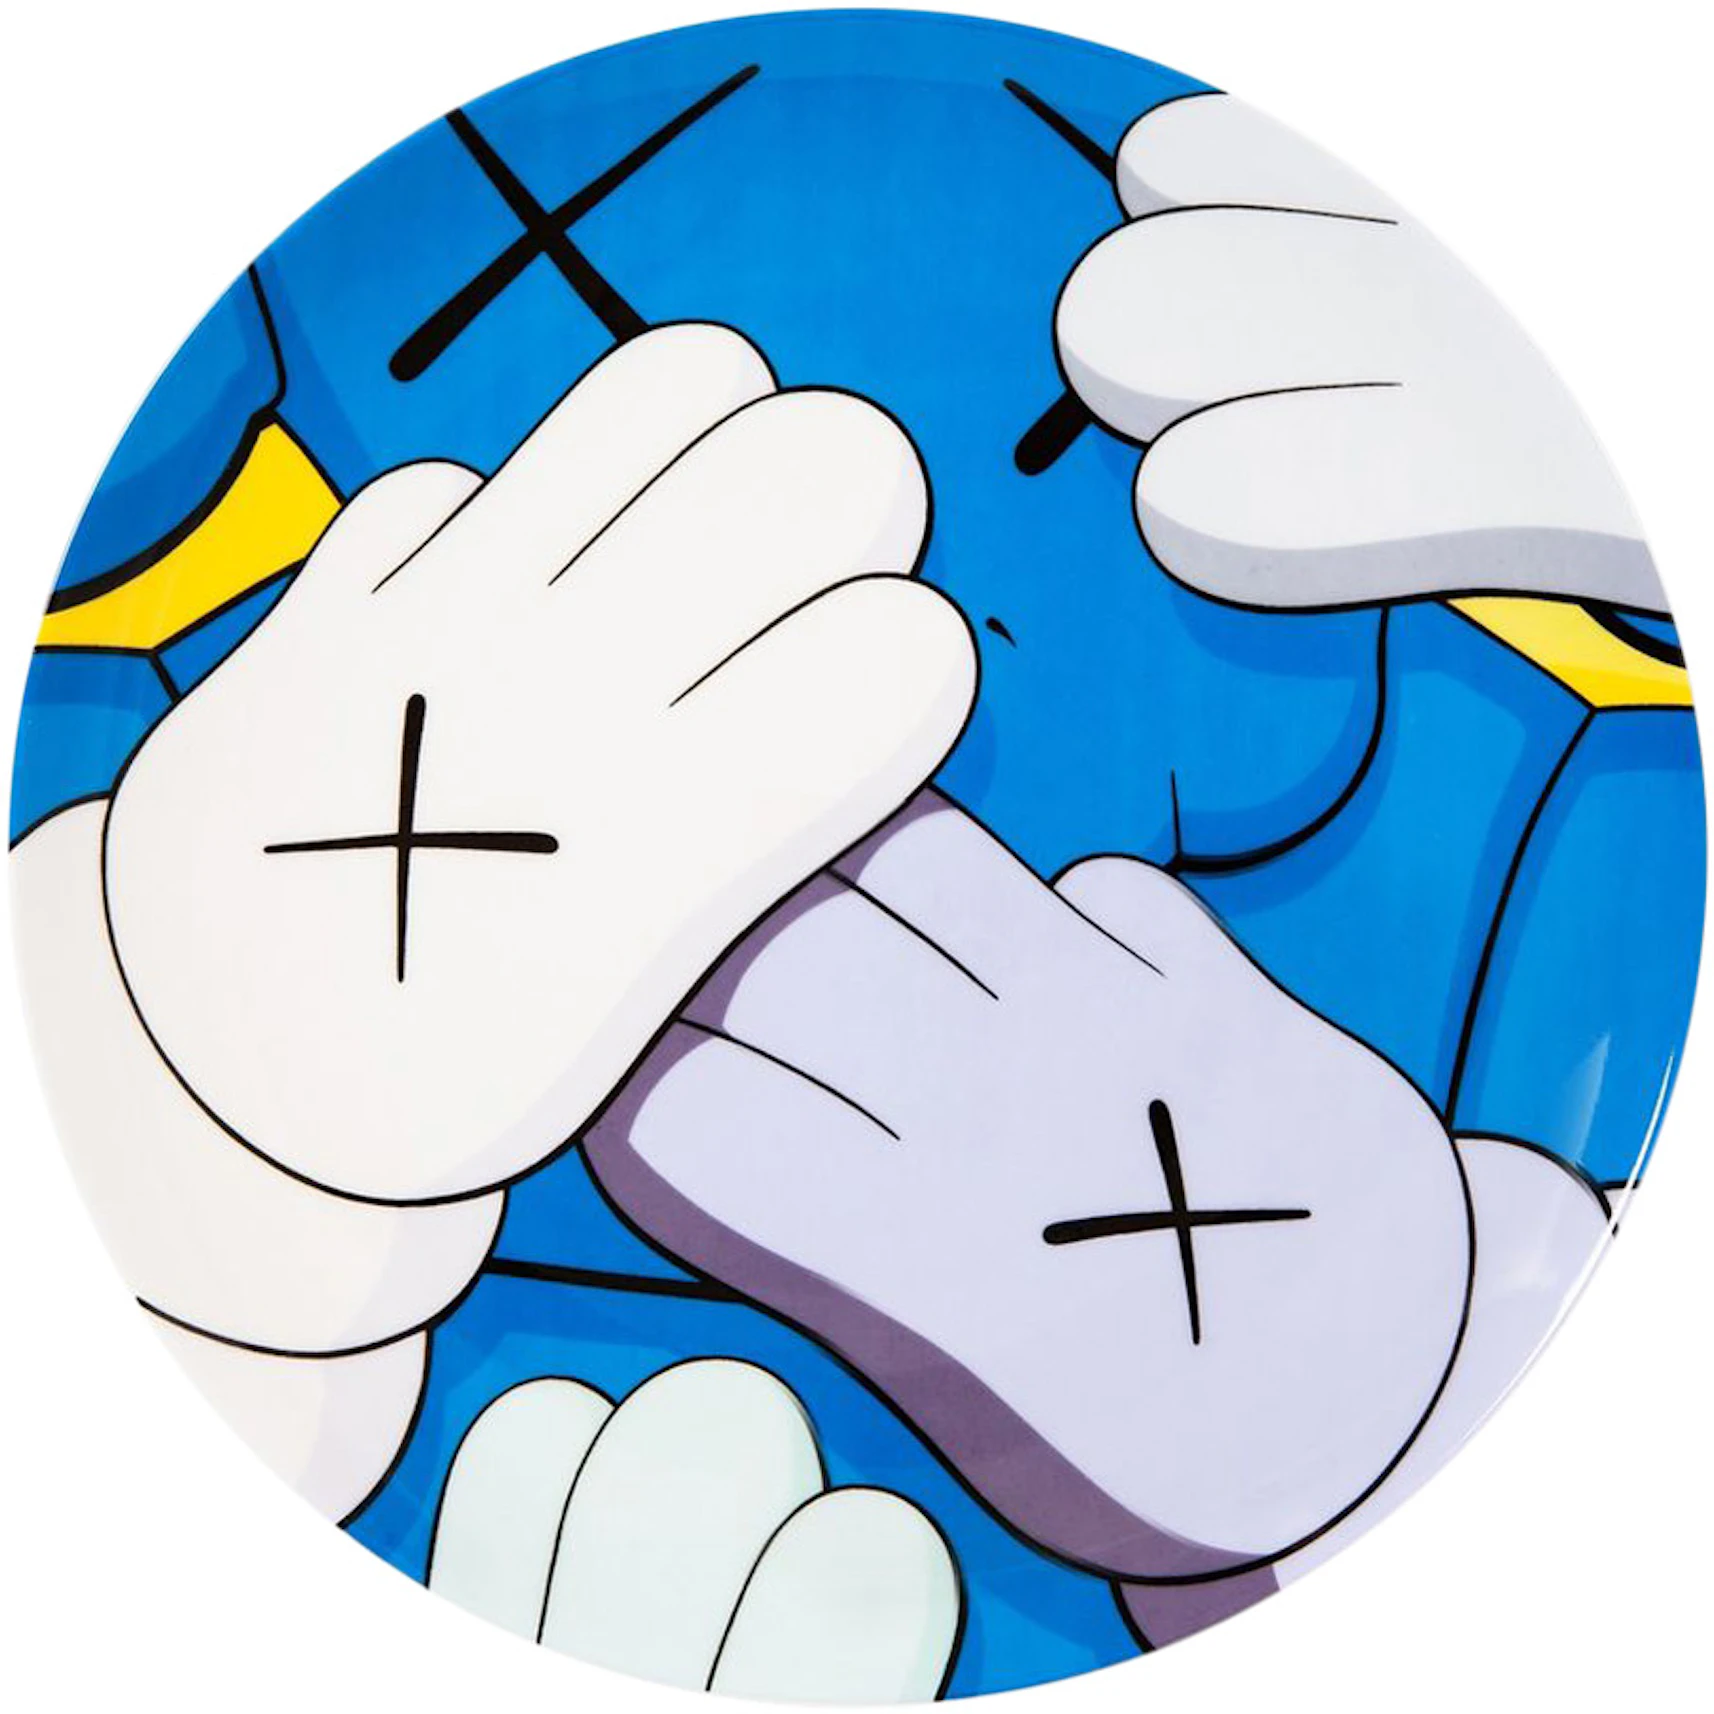 Artist Plate Project x KAWS URGE Plate (Edition of 250) FW21 IT